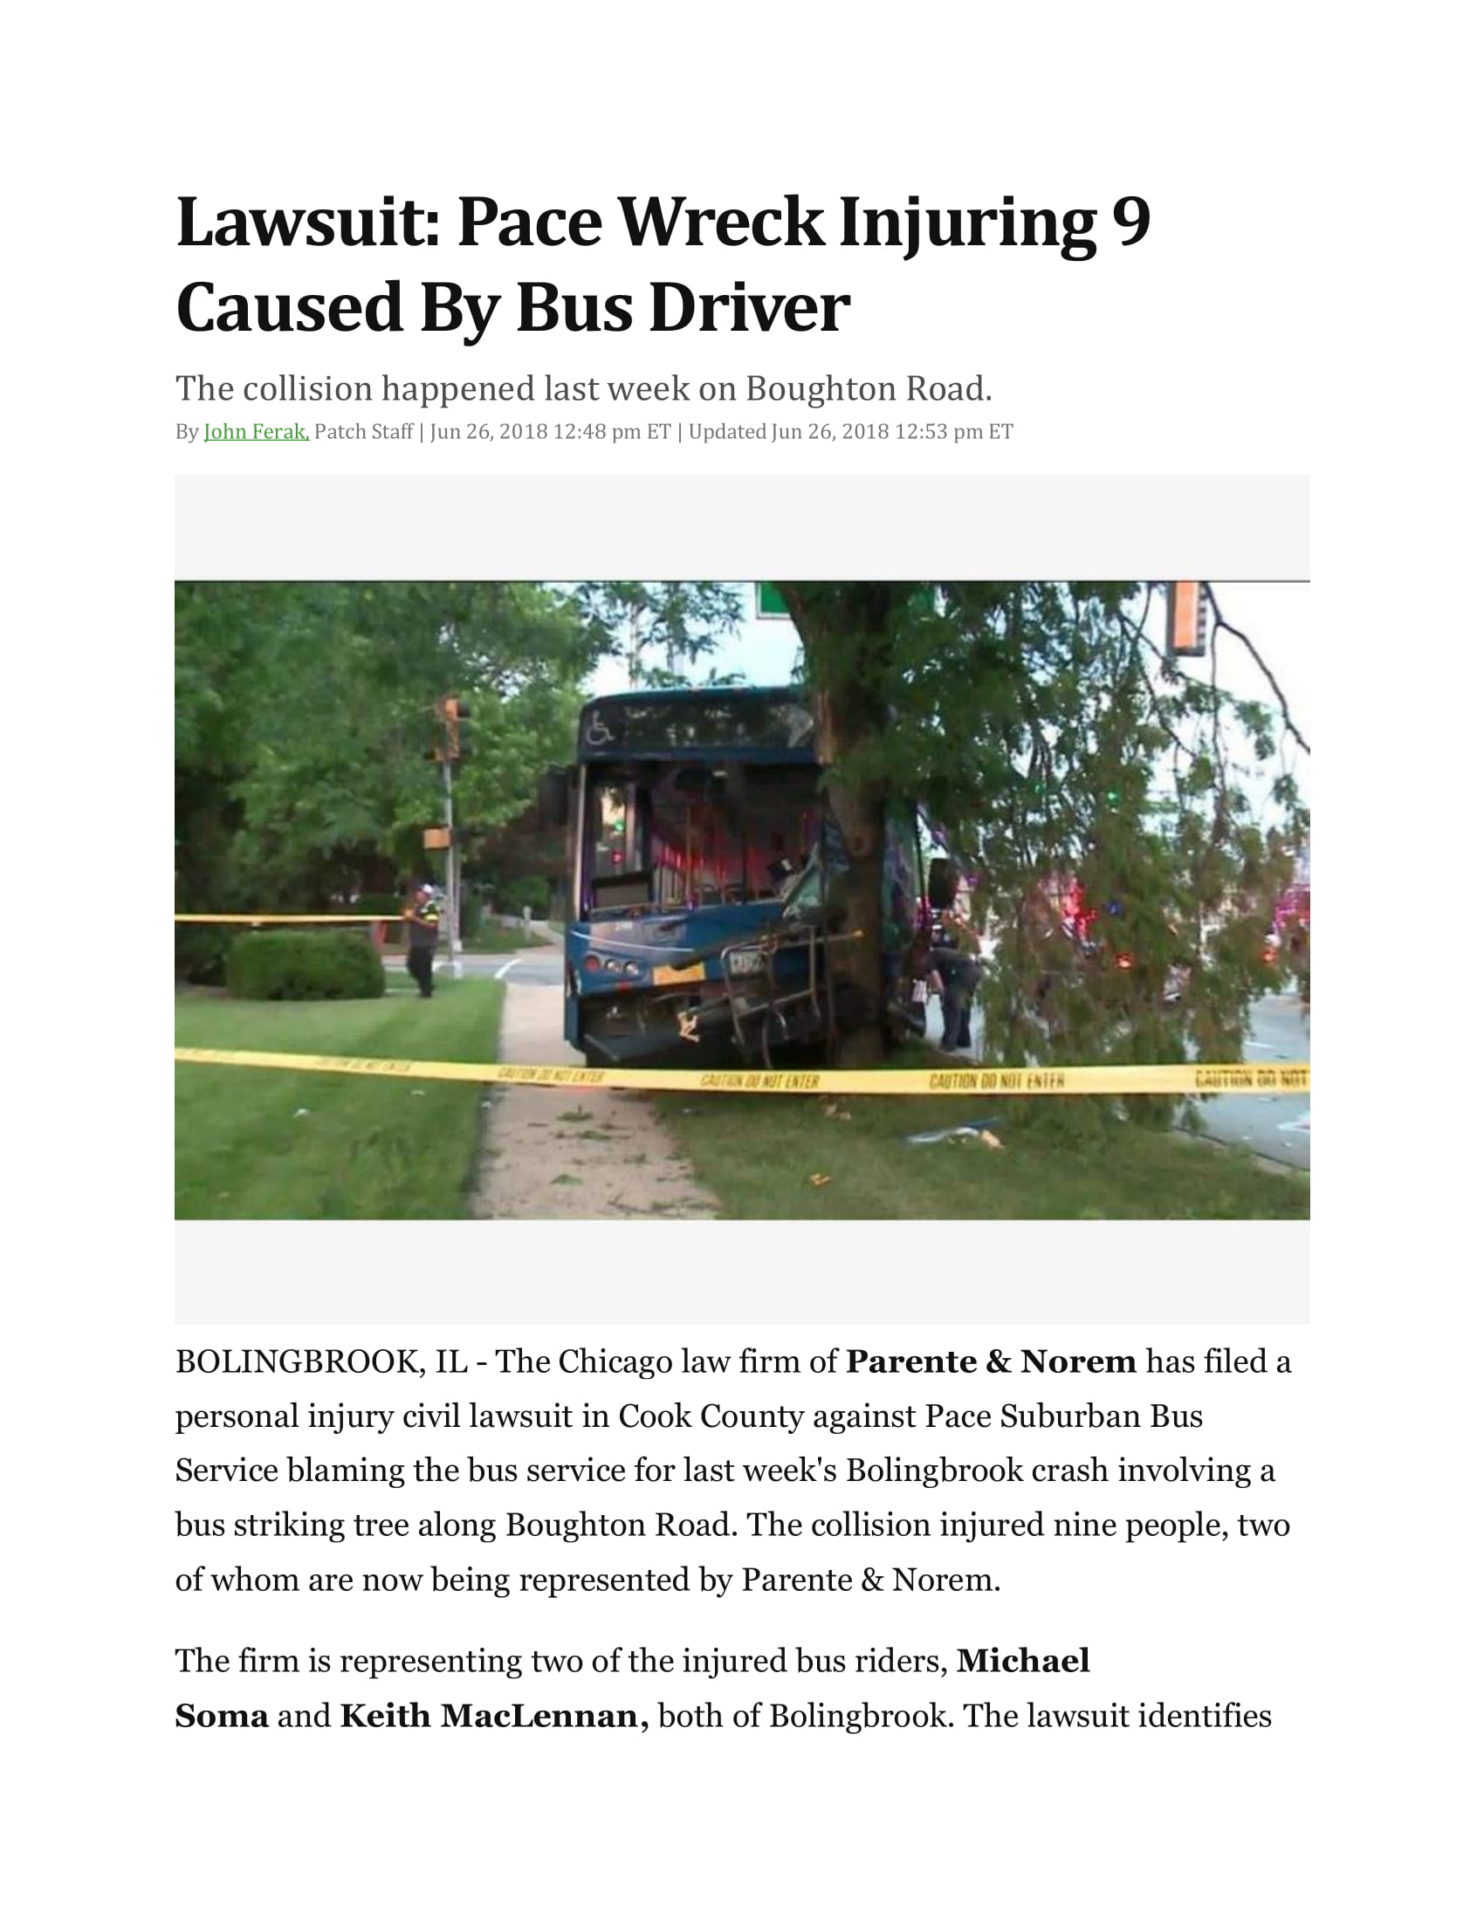 https://www.pninjurylaw.com/wp-content/uploads/2018/06/Pace-Wreck-Injuring-9-Caused-By-Bus-Driver-1.jpg